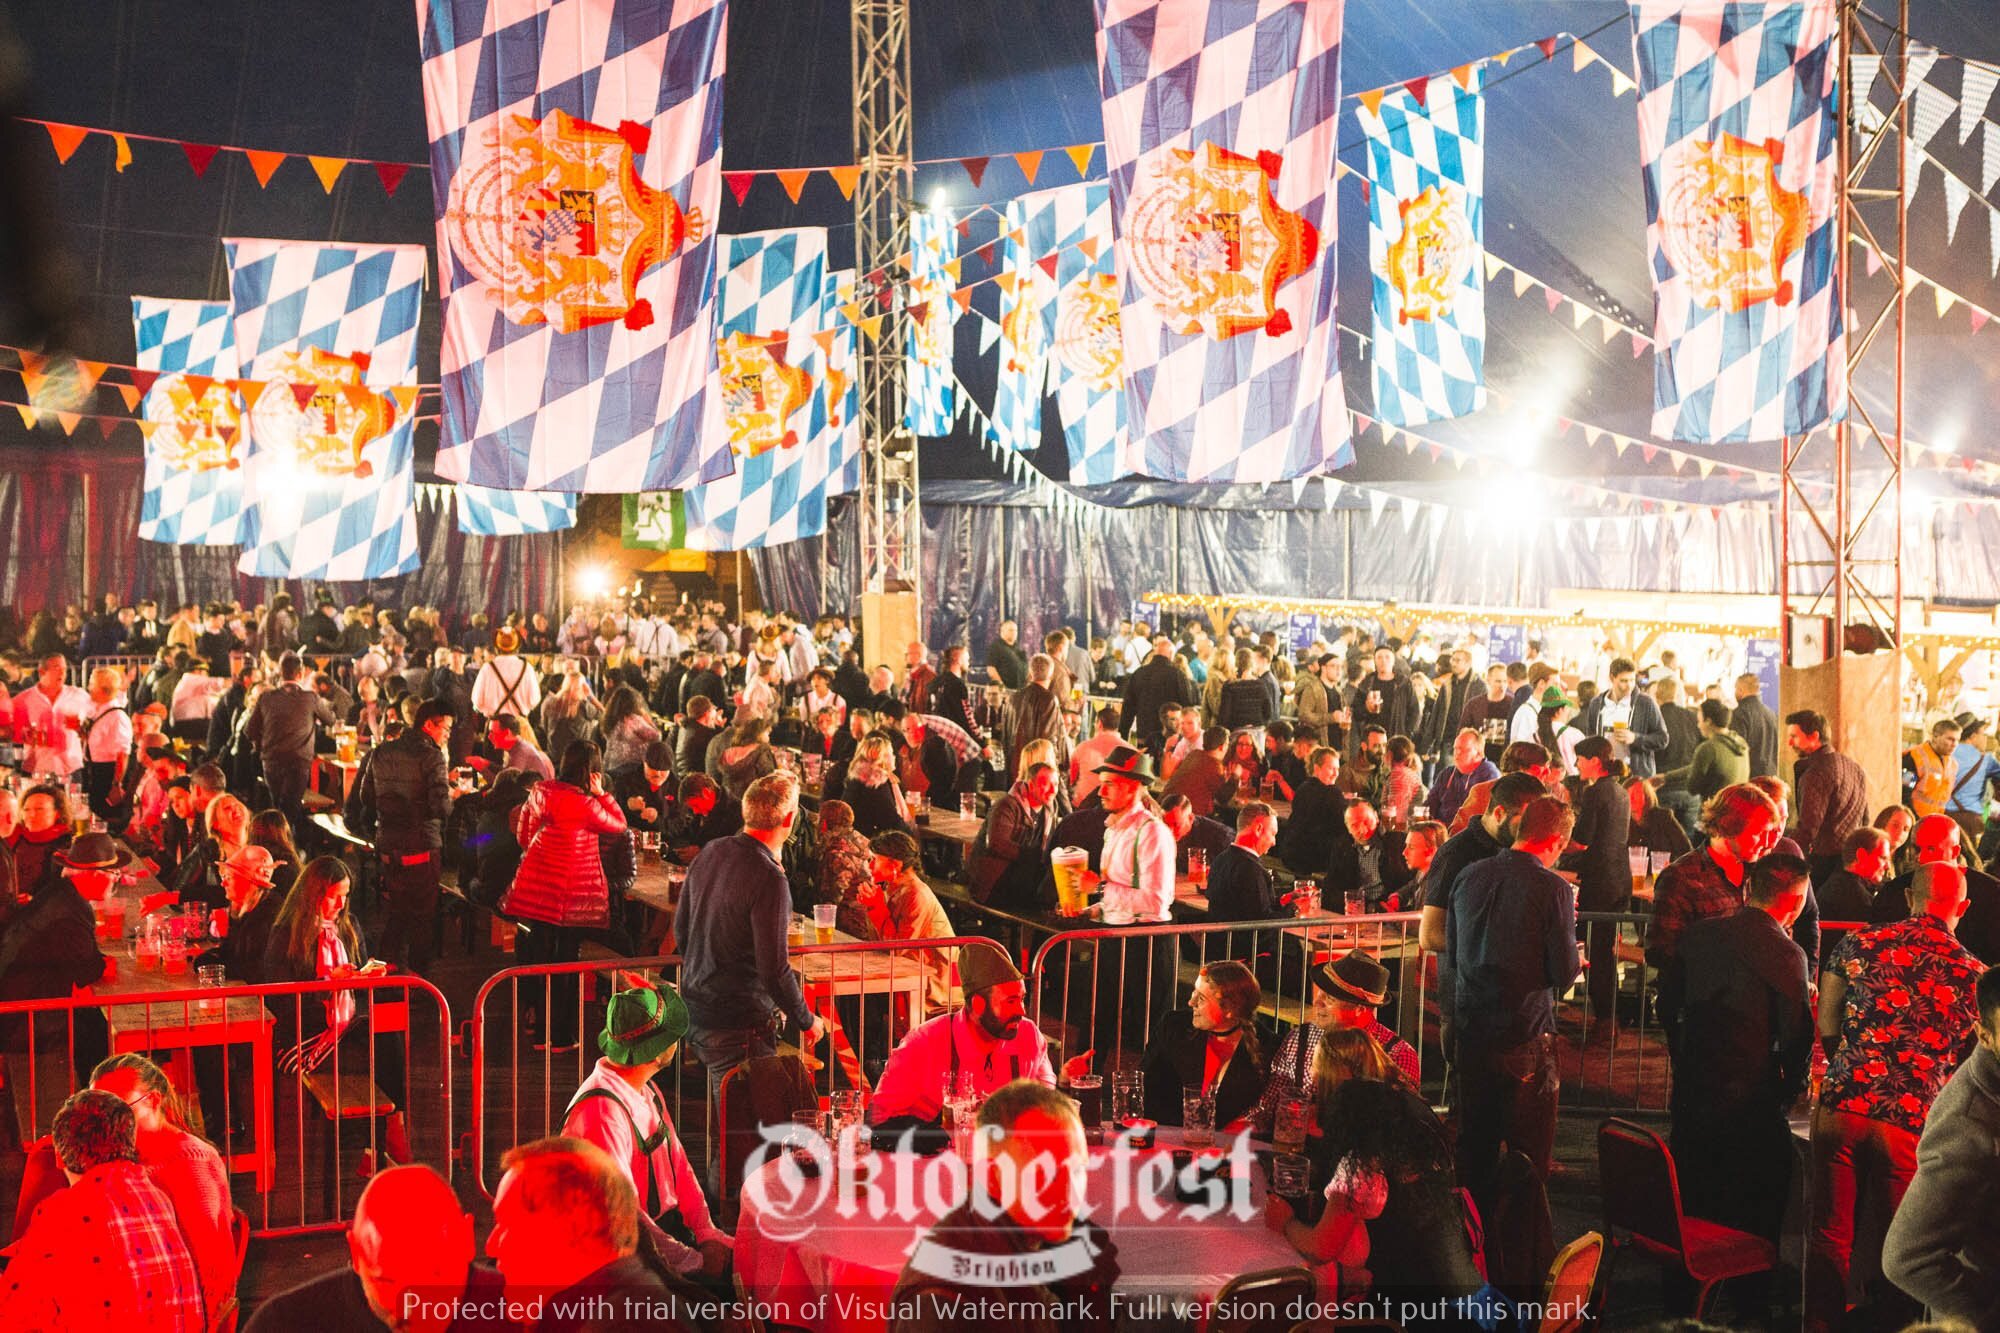 Think it's too early to get your lederhosen our and raise a stein? 

Well lets just prepare ourselves for October this year and grab tickets to an unforgettable experience at Oktoberfest filled with beer, oompah bands and an amazing atmosphere 🍻🎉

